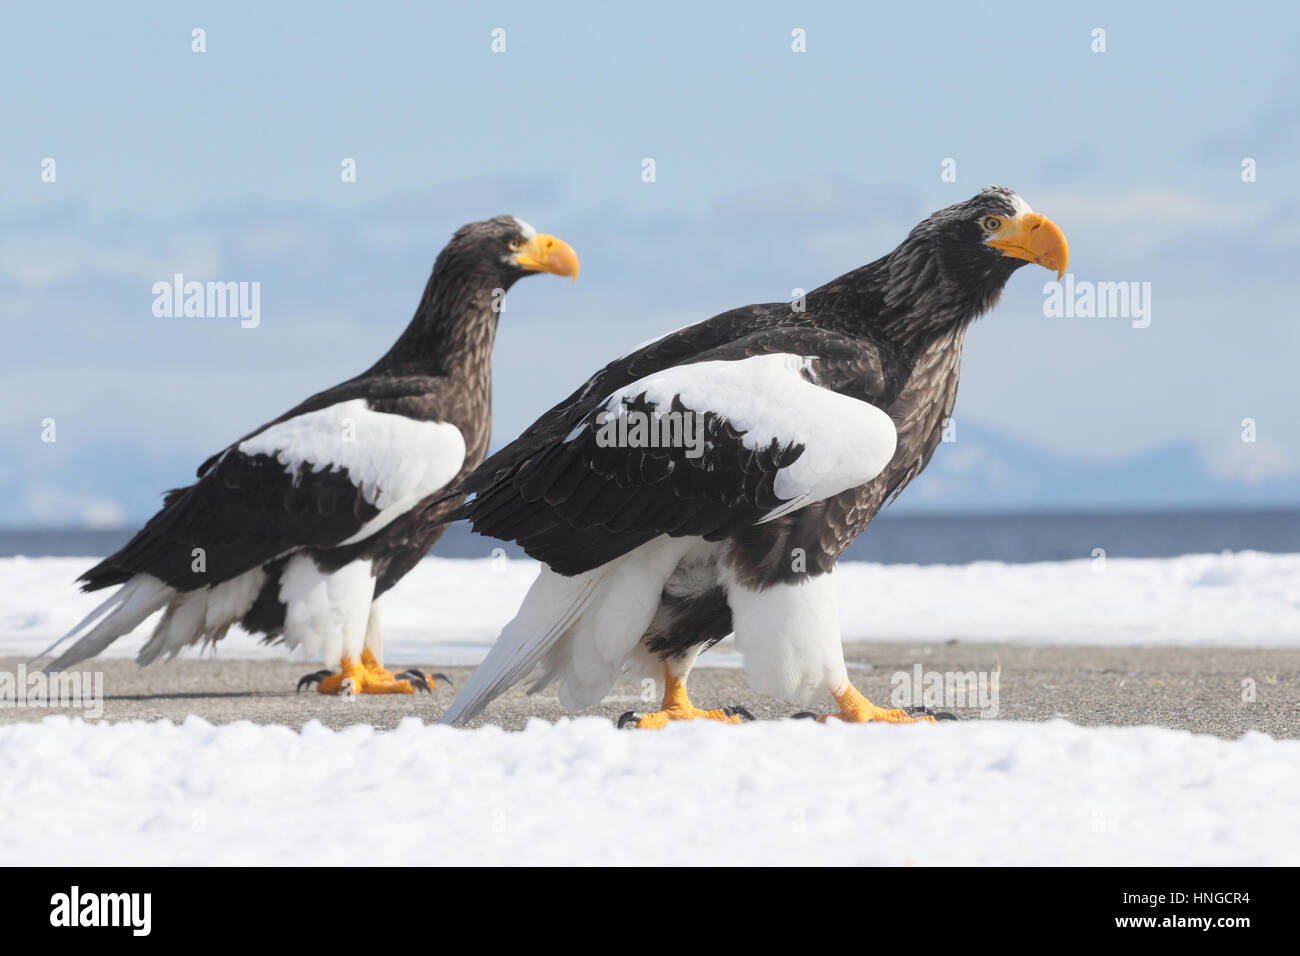 Wide angle of Steller's sea eagleS (Haliaeetus pelagicus) in Hokkaido, Japan. World's largest eagle, perched on harbour wall, scenery in background Stock Photo